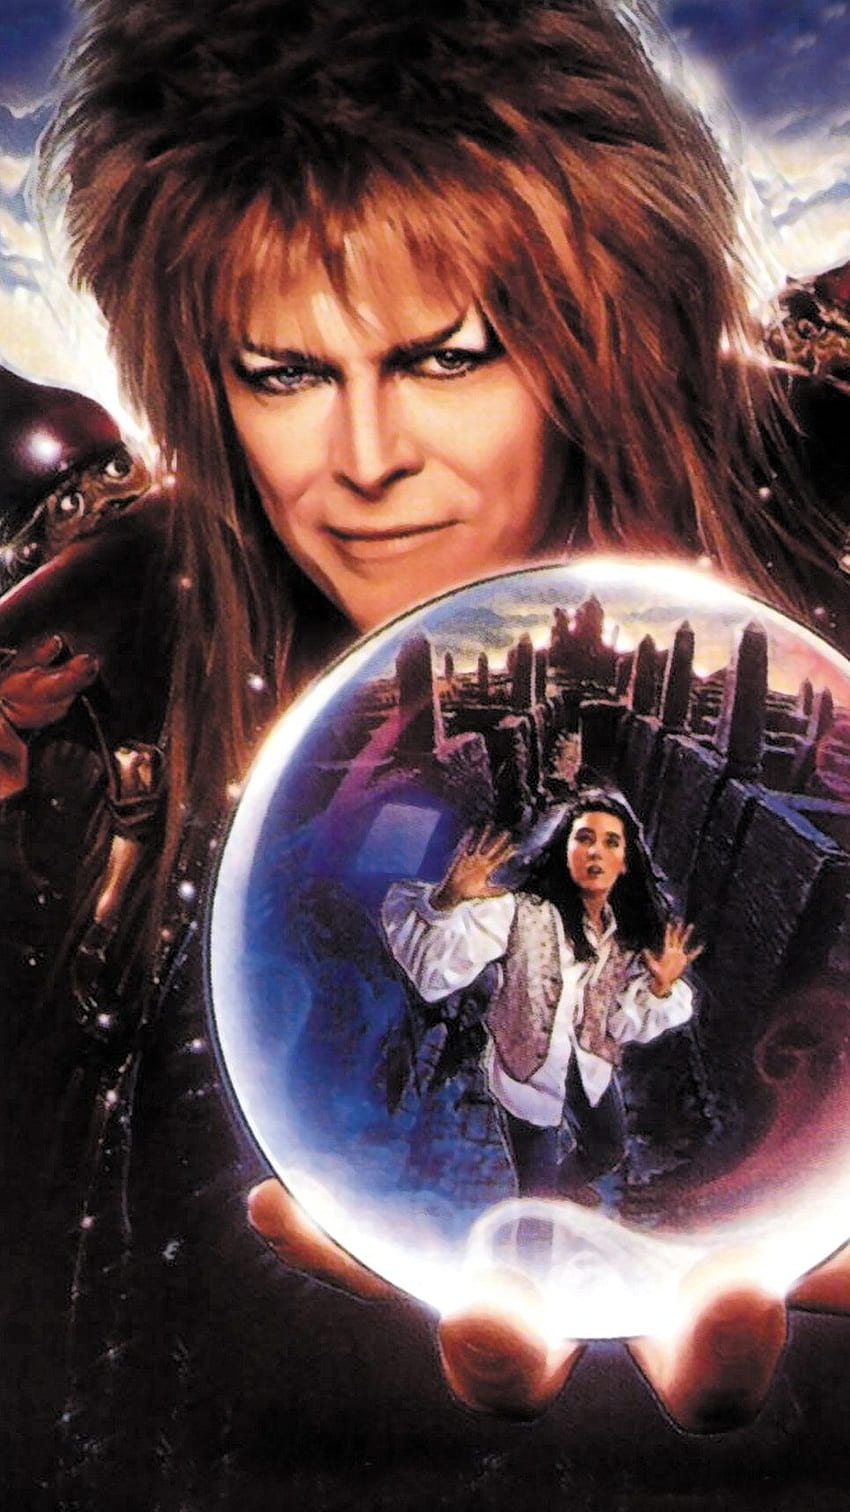 Labyrinth Movie - Watch Movies and TV Shows Online. Streaming Movies, David Bowie Labyrinth HD phone wallpaper